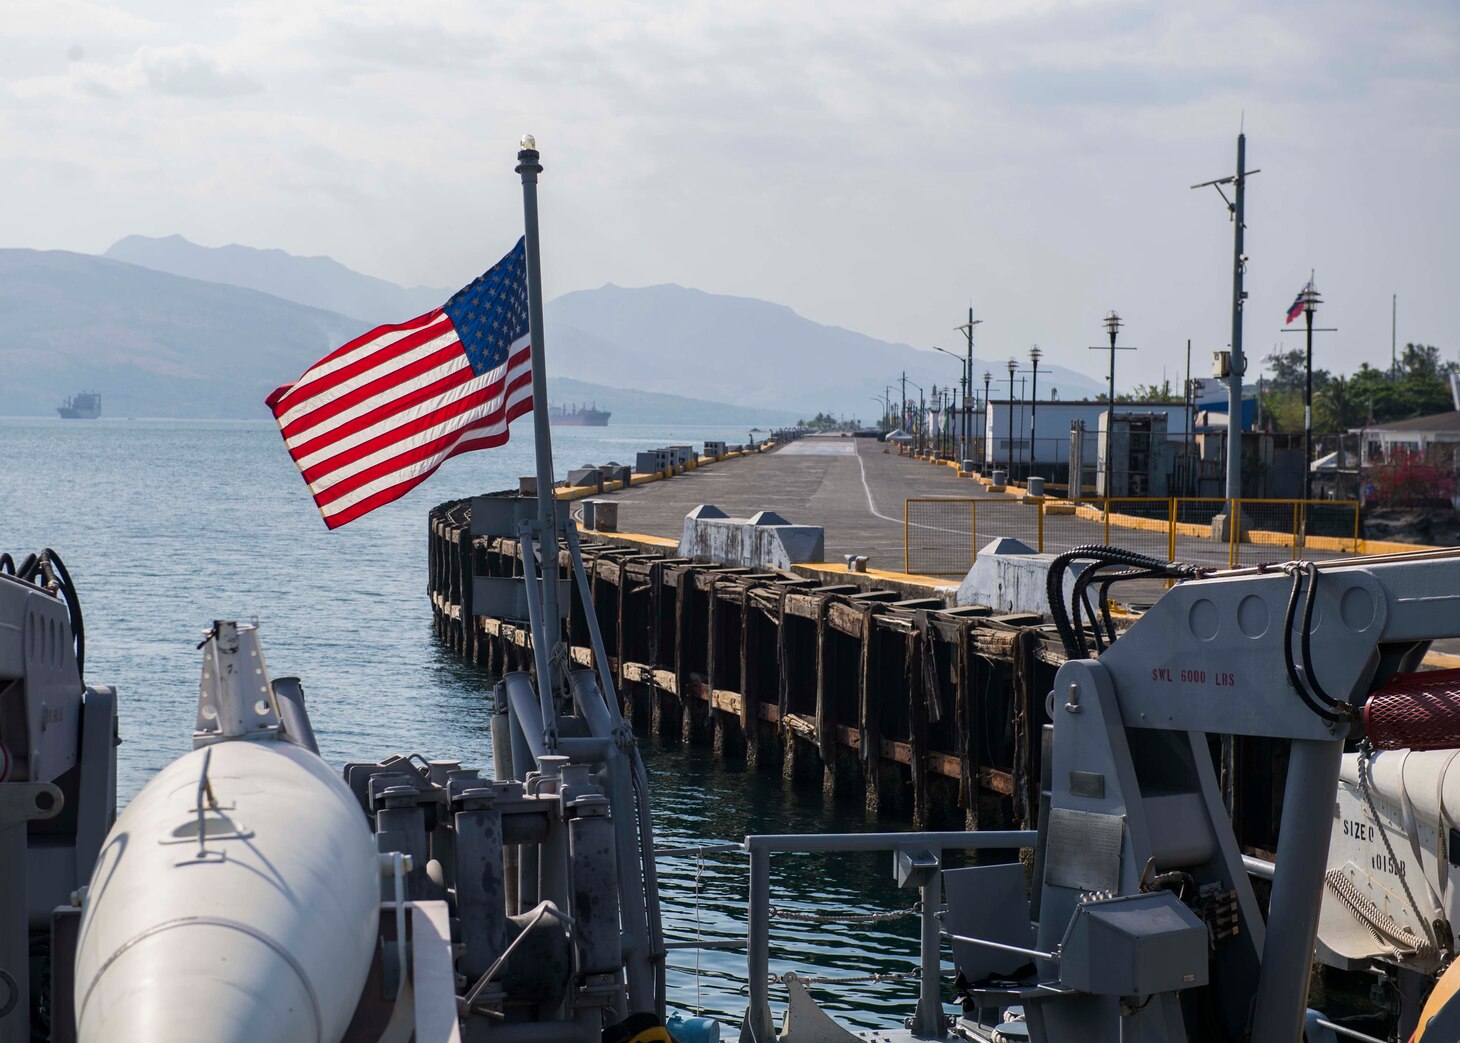 Pioneer, part of Mine Countermeasures Squadron 7, is operating in the U.S. 7th Fleet area of operations to enhance interoperability with partners and serve as a ready-response platform for contingency operations.